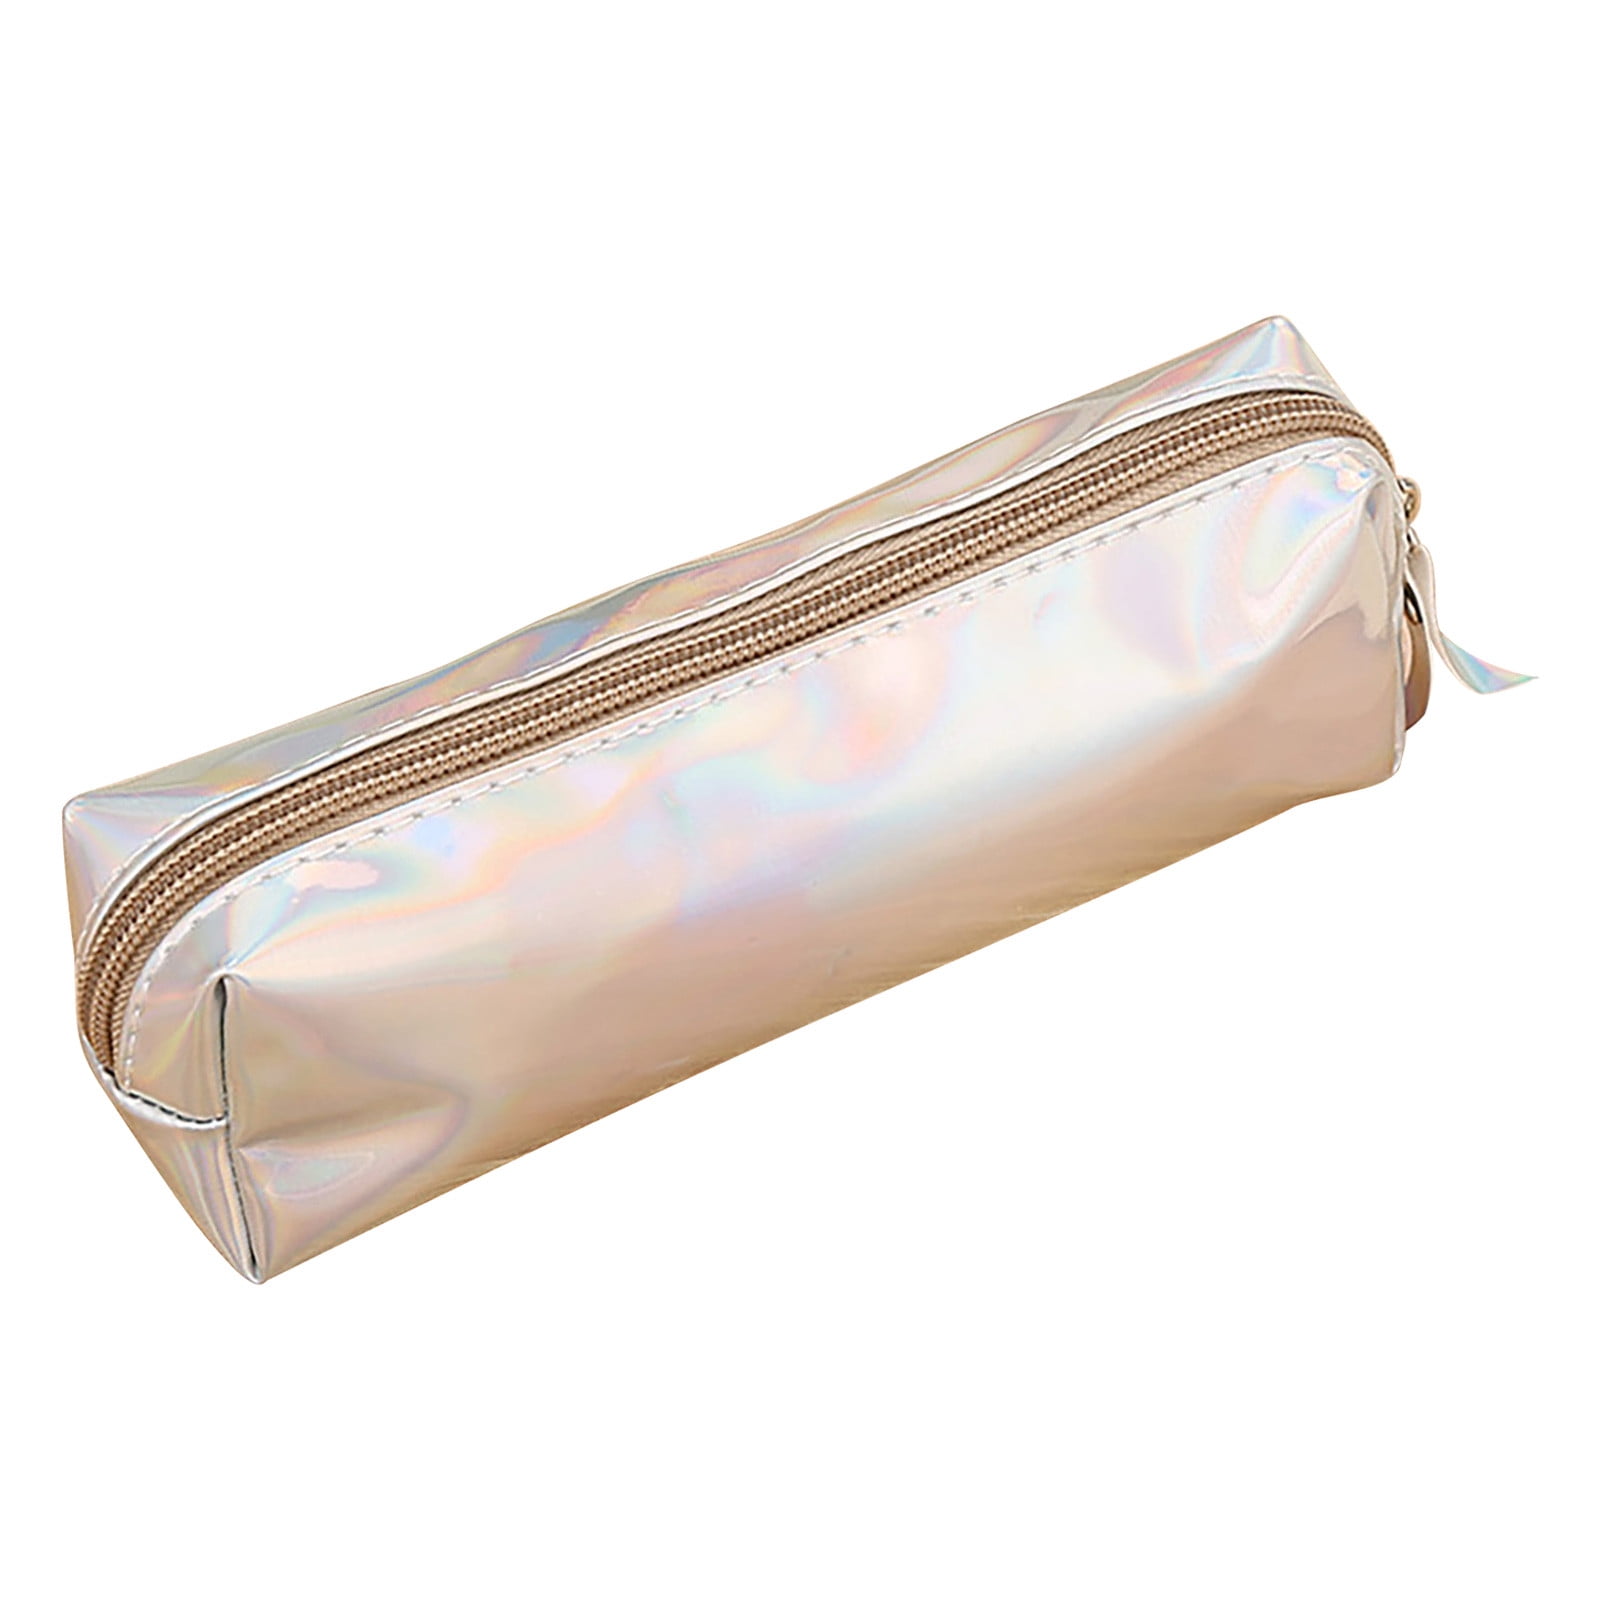 Ziloco pencil pouch Colorful Pencil Case, Storage Coin Purse,  Multifunctional Stationery Bag kawaii pencil case,Silver 